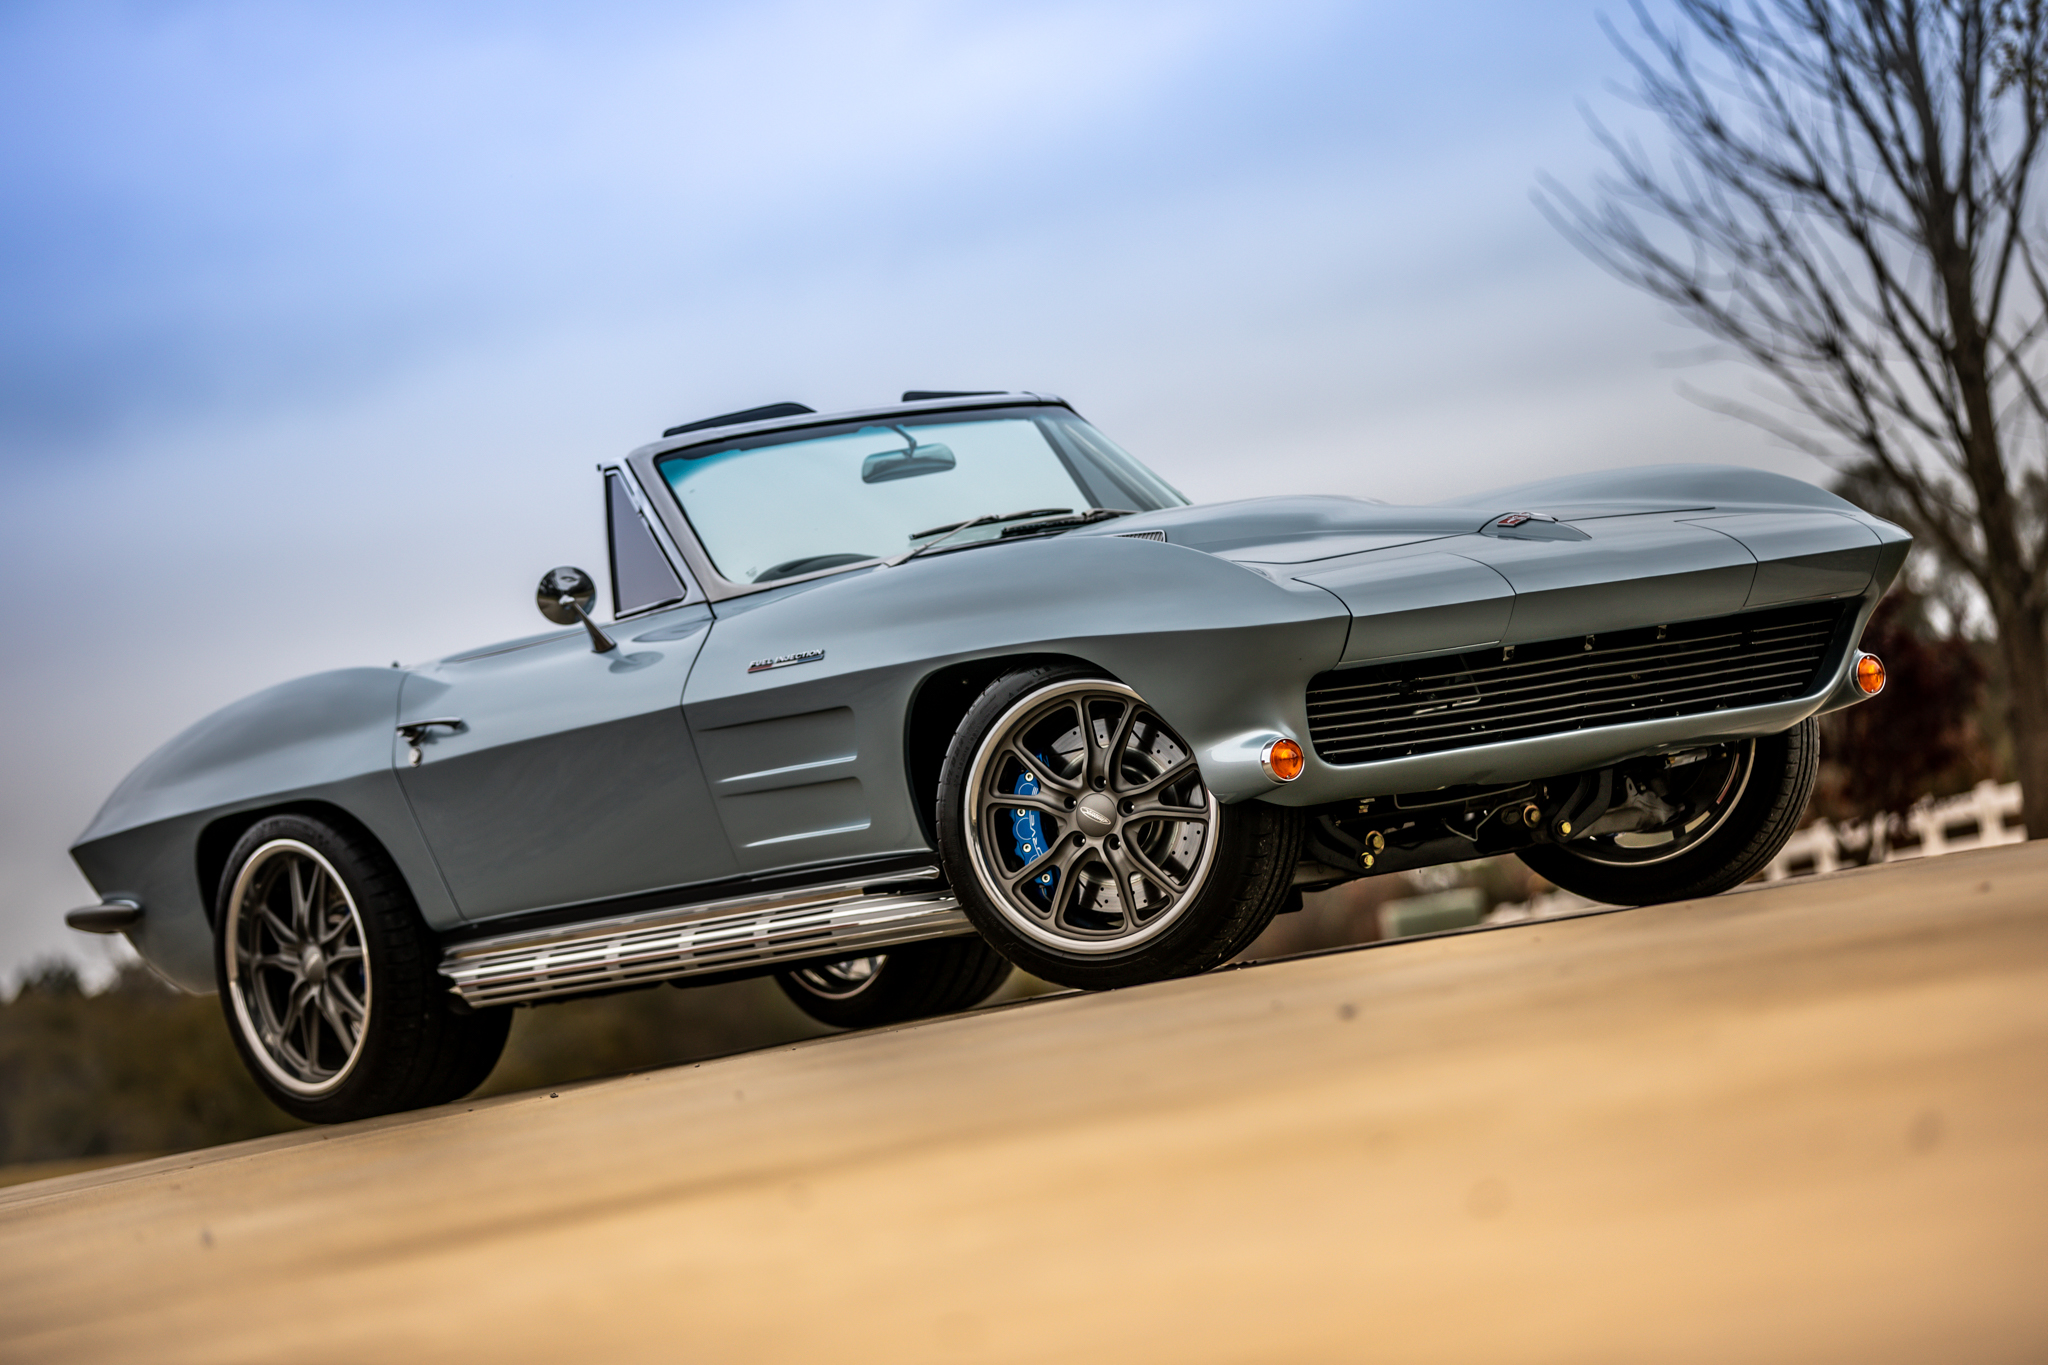 Check Out This One-Of-A-Kind 1963 Restomod Corvette